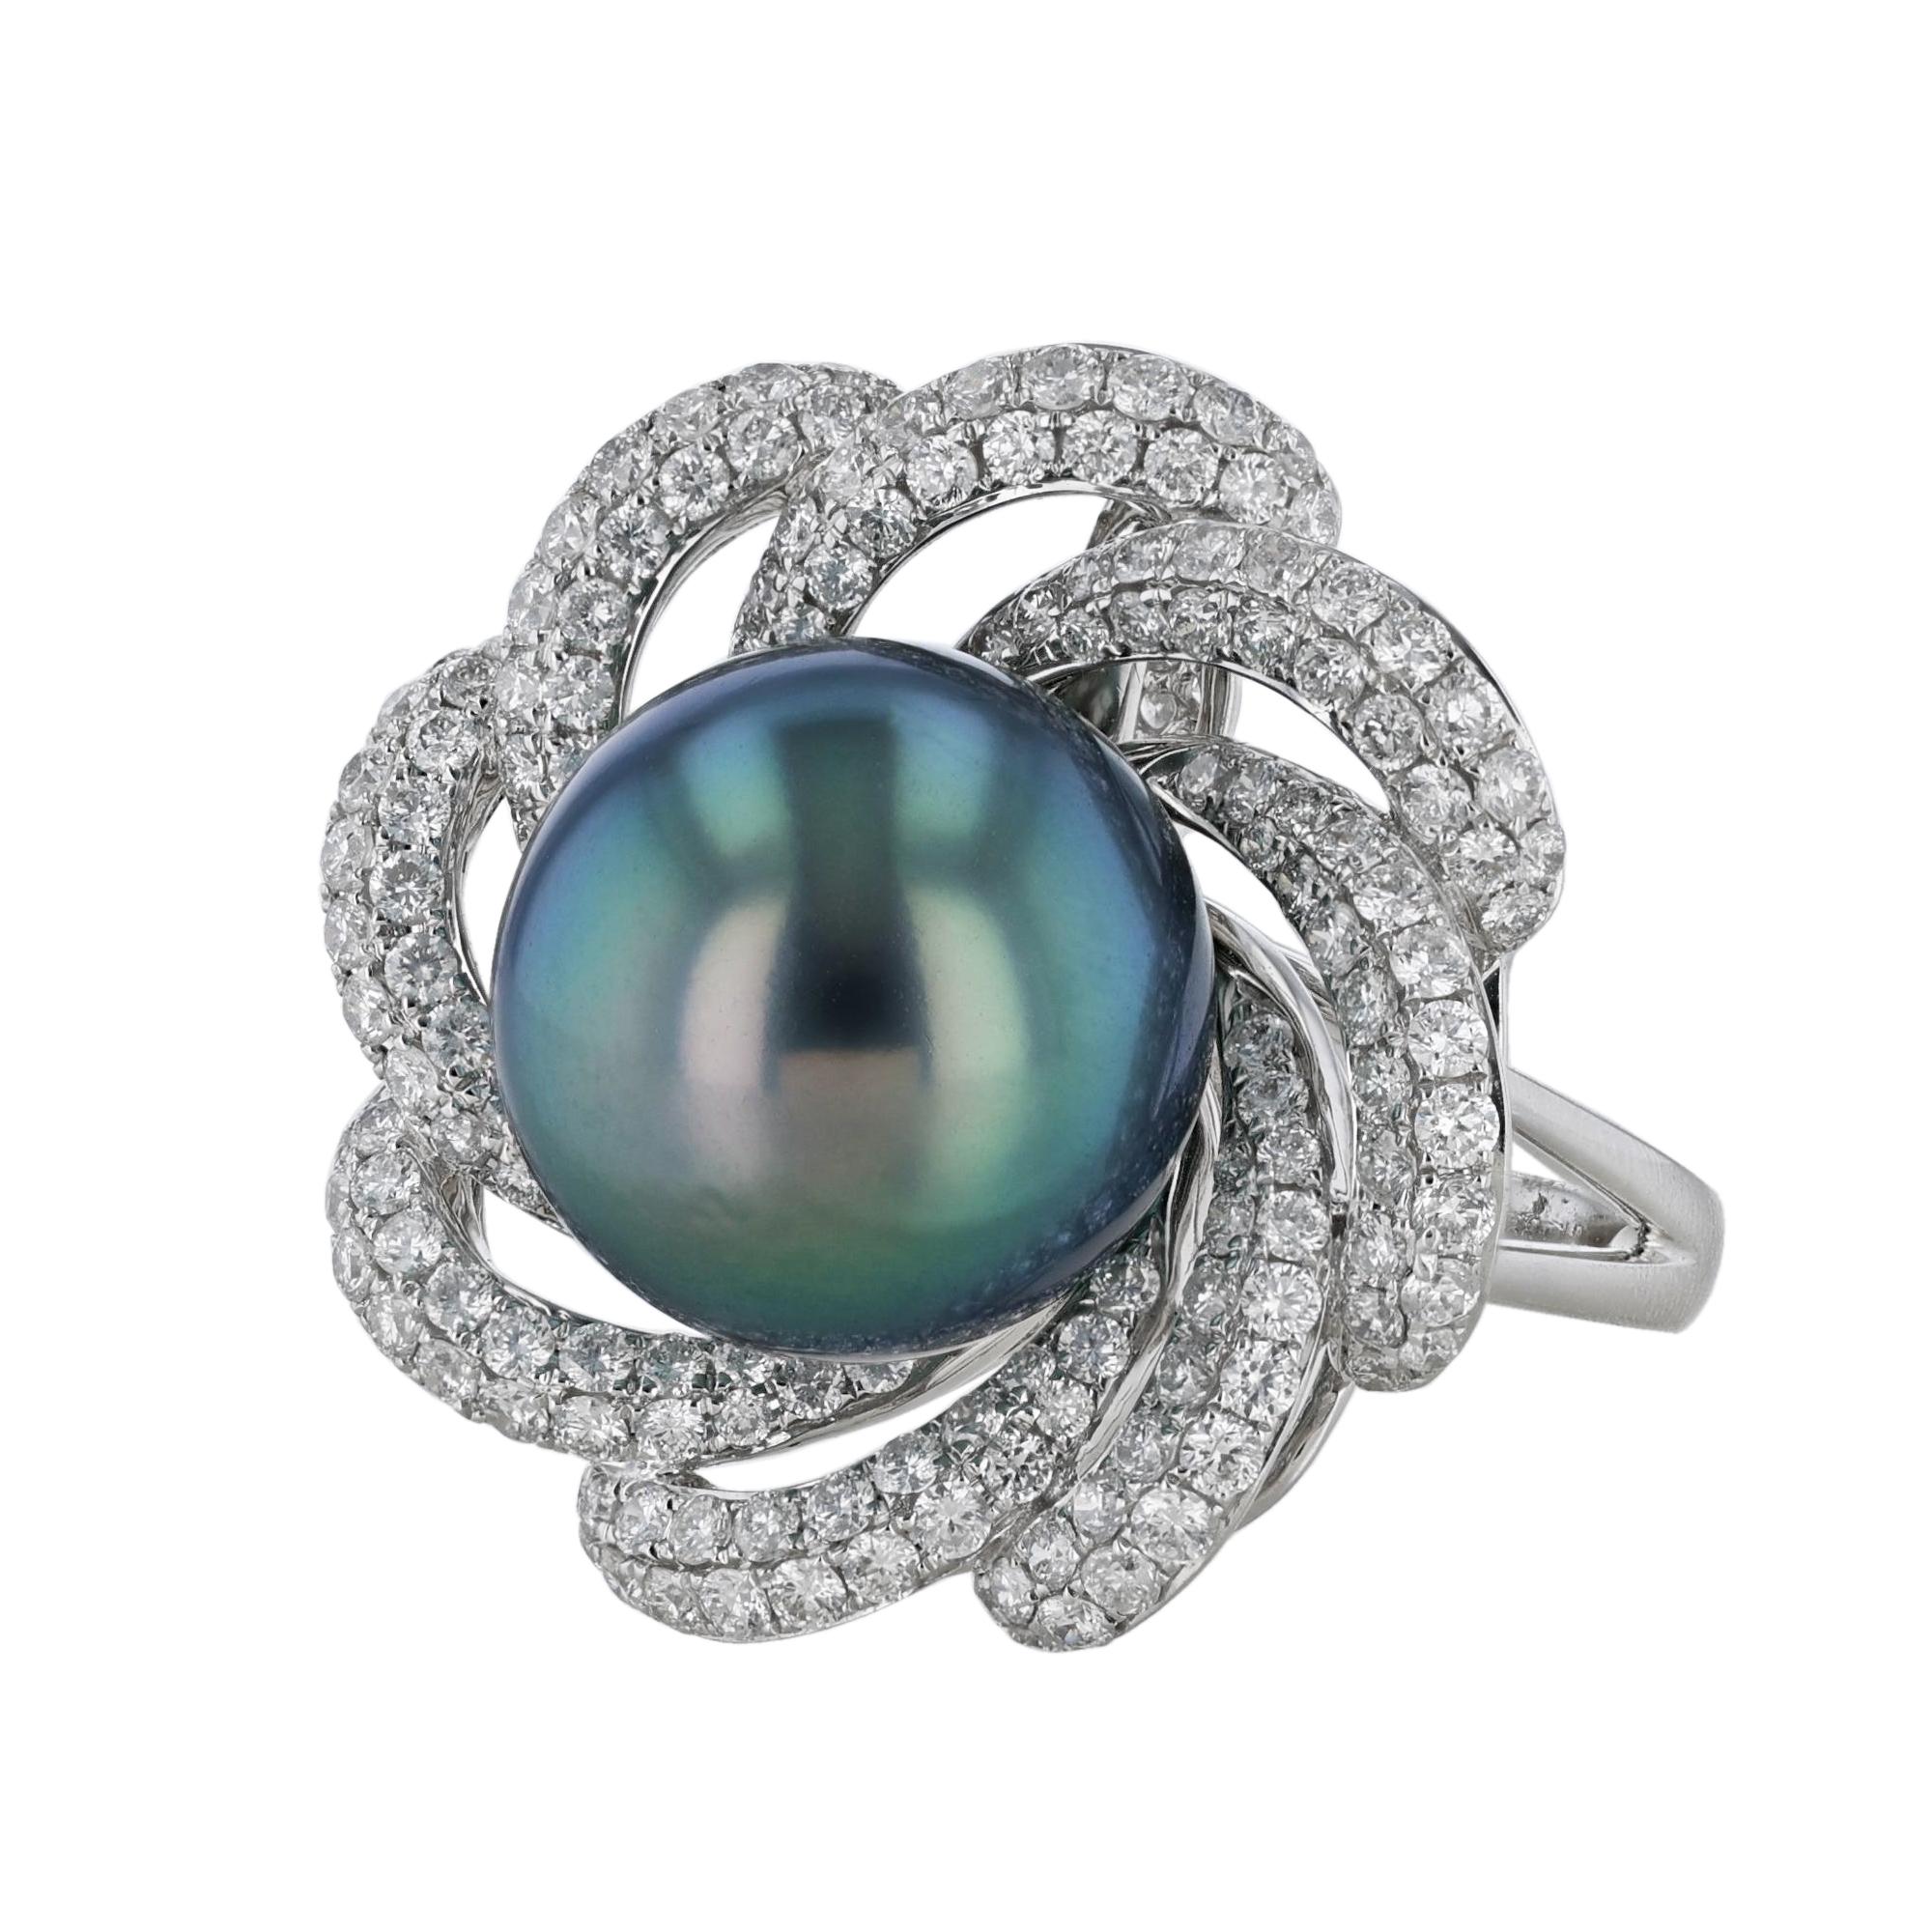 This ring is made in 18K white gold and features a center 14.25 millimeter South Sea Pearl. Surrounded by a floral motif of 176 diamonds weighing 2.13 carats. 